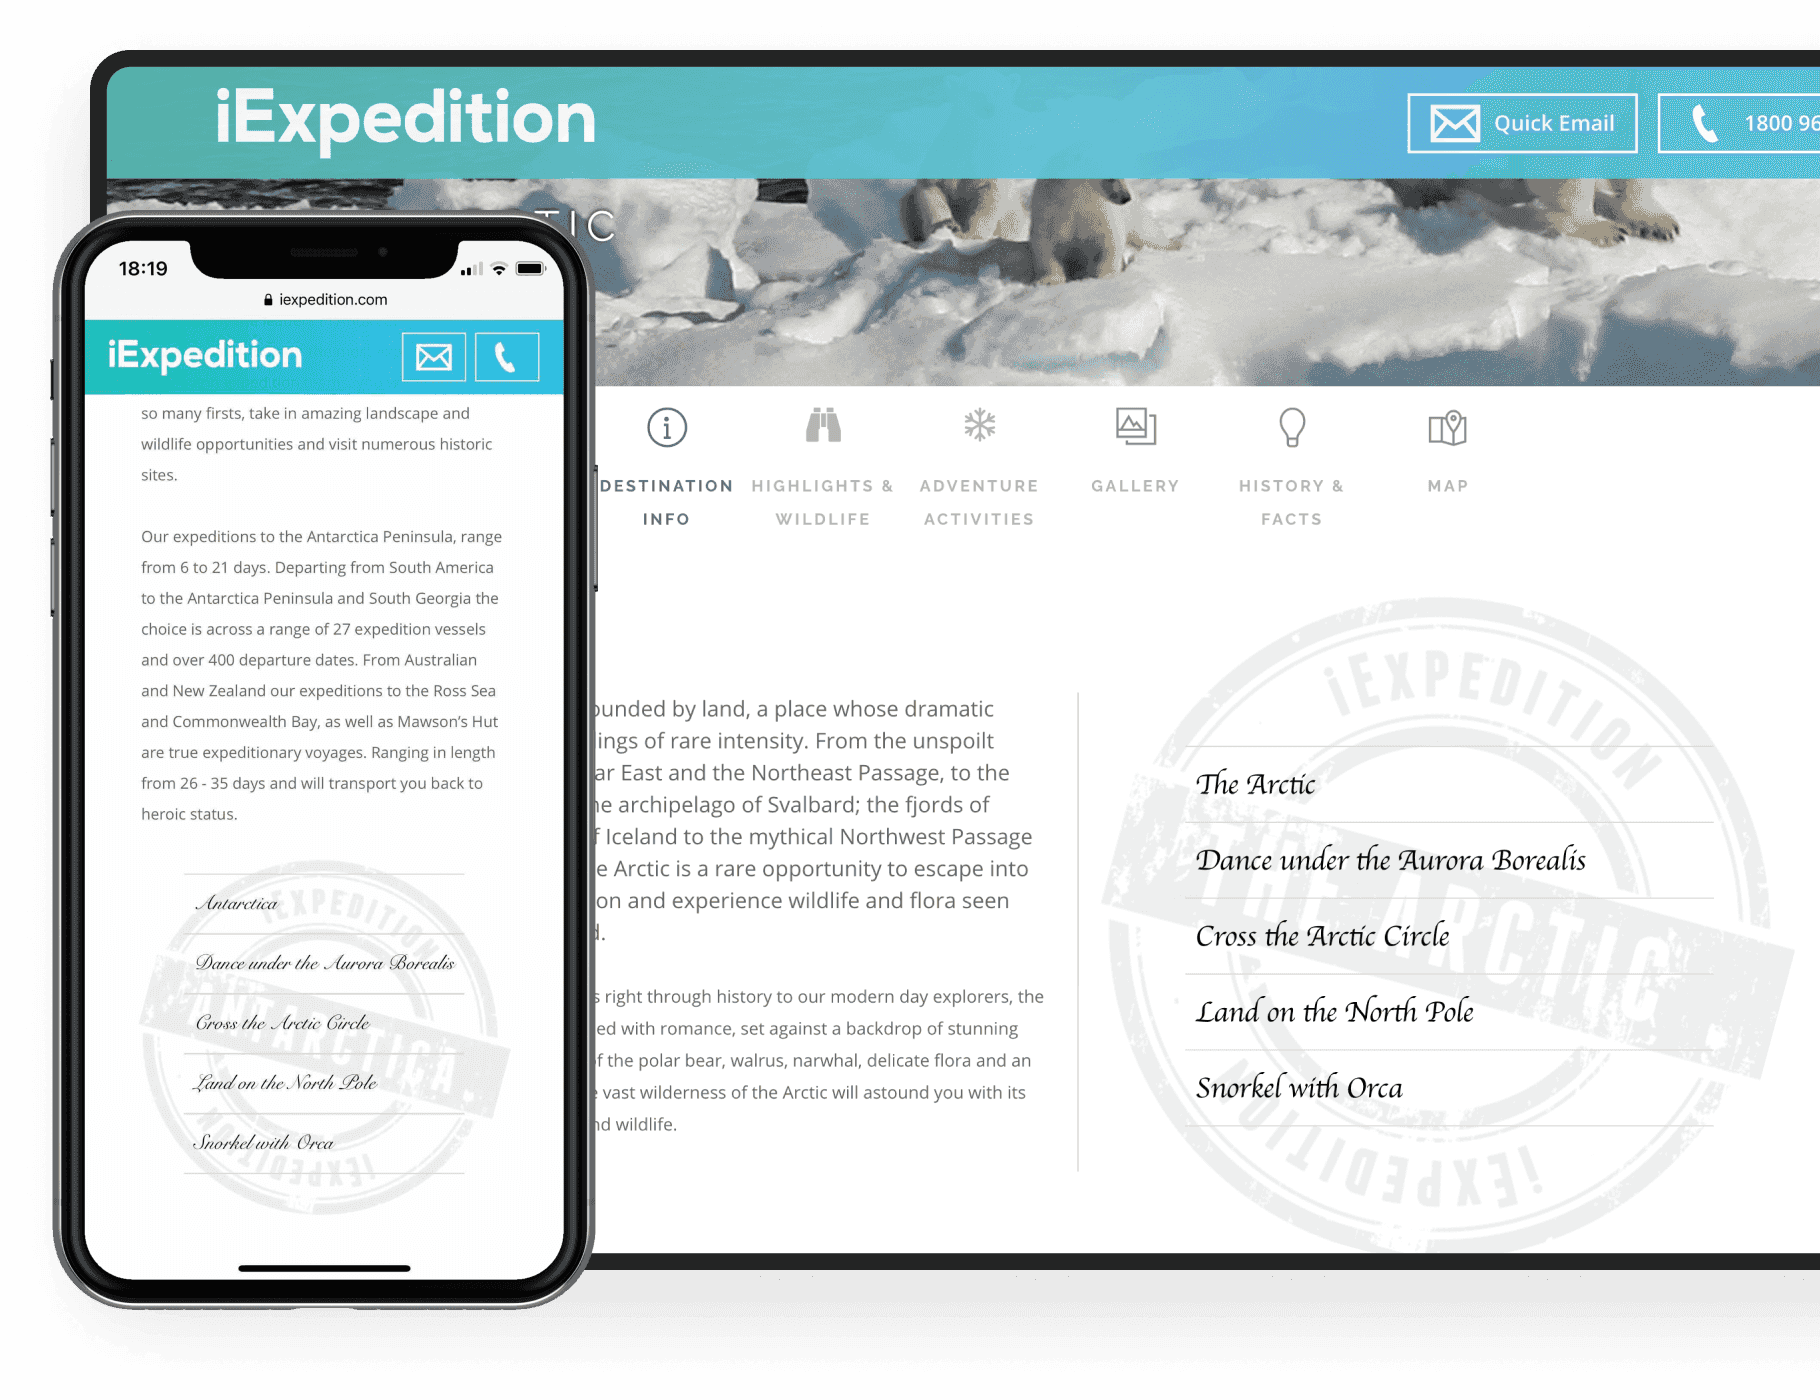 Comprehensive cruise booking system for iExpedition